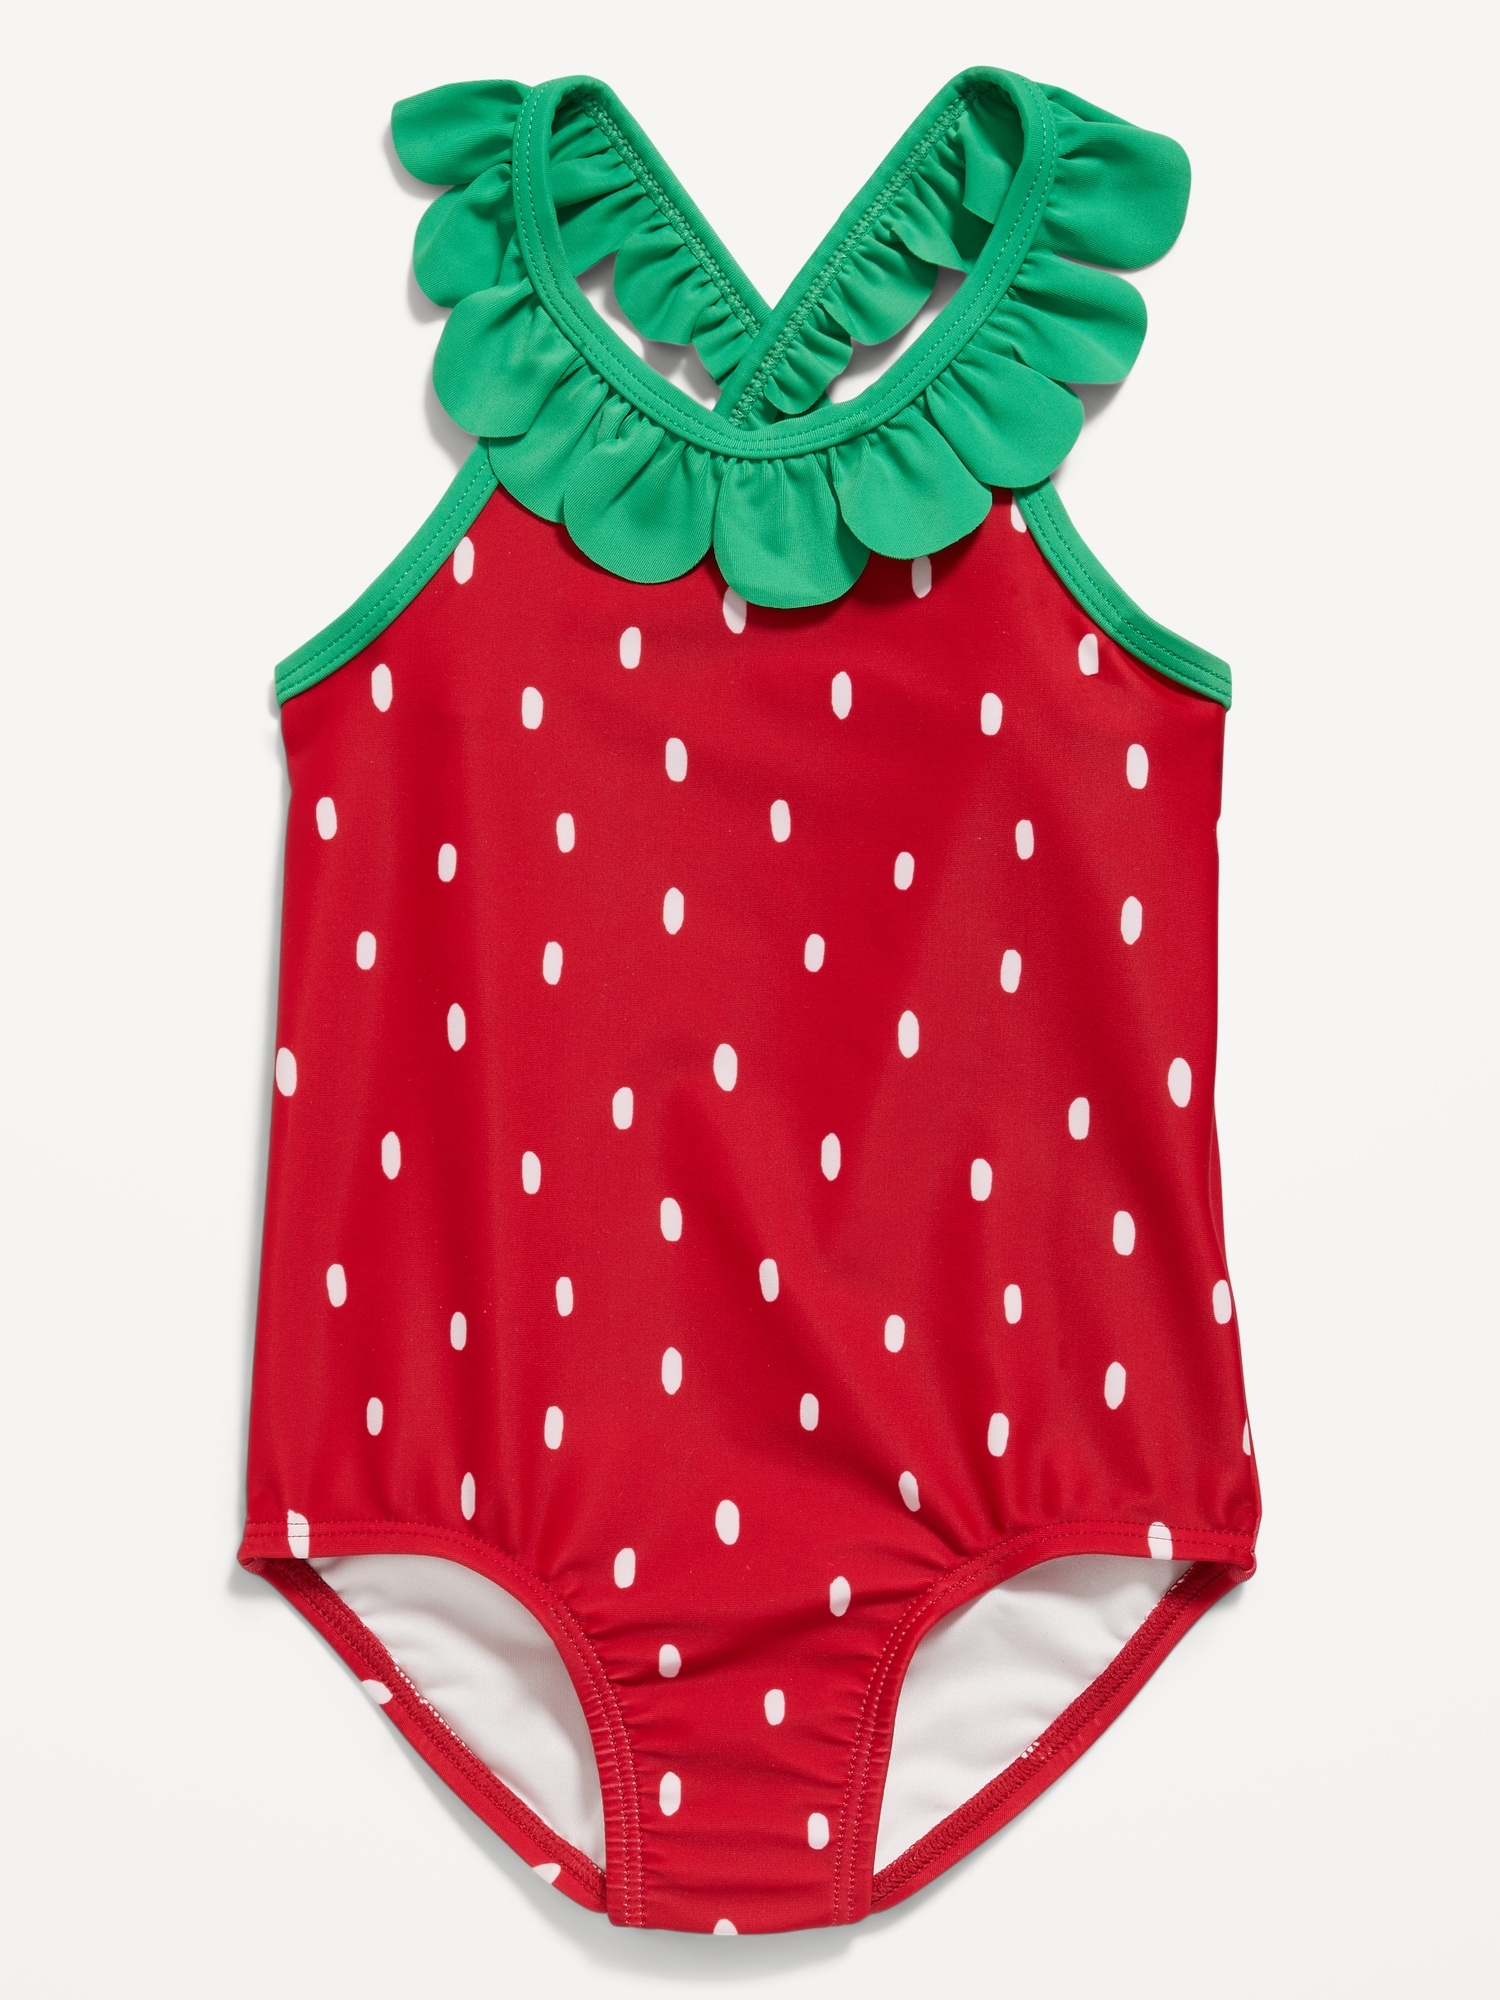 Printed Swimsuit for Toddler Girls | Old Navy